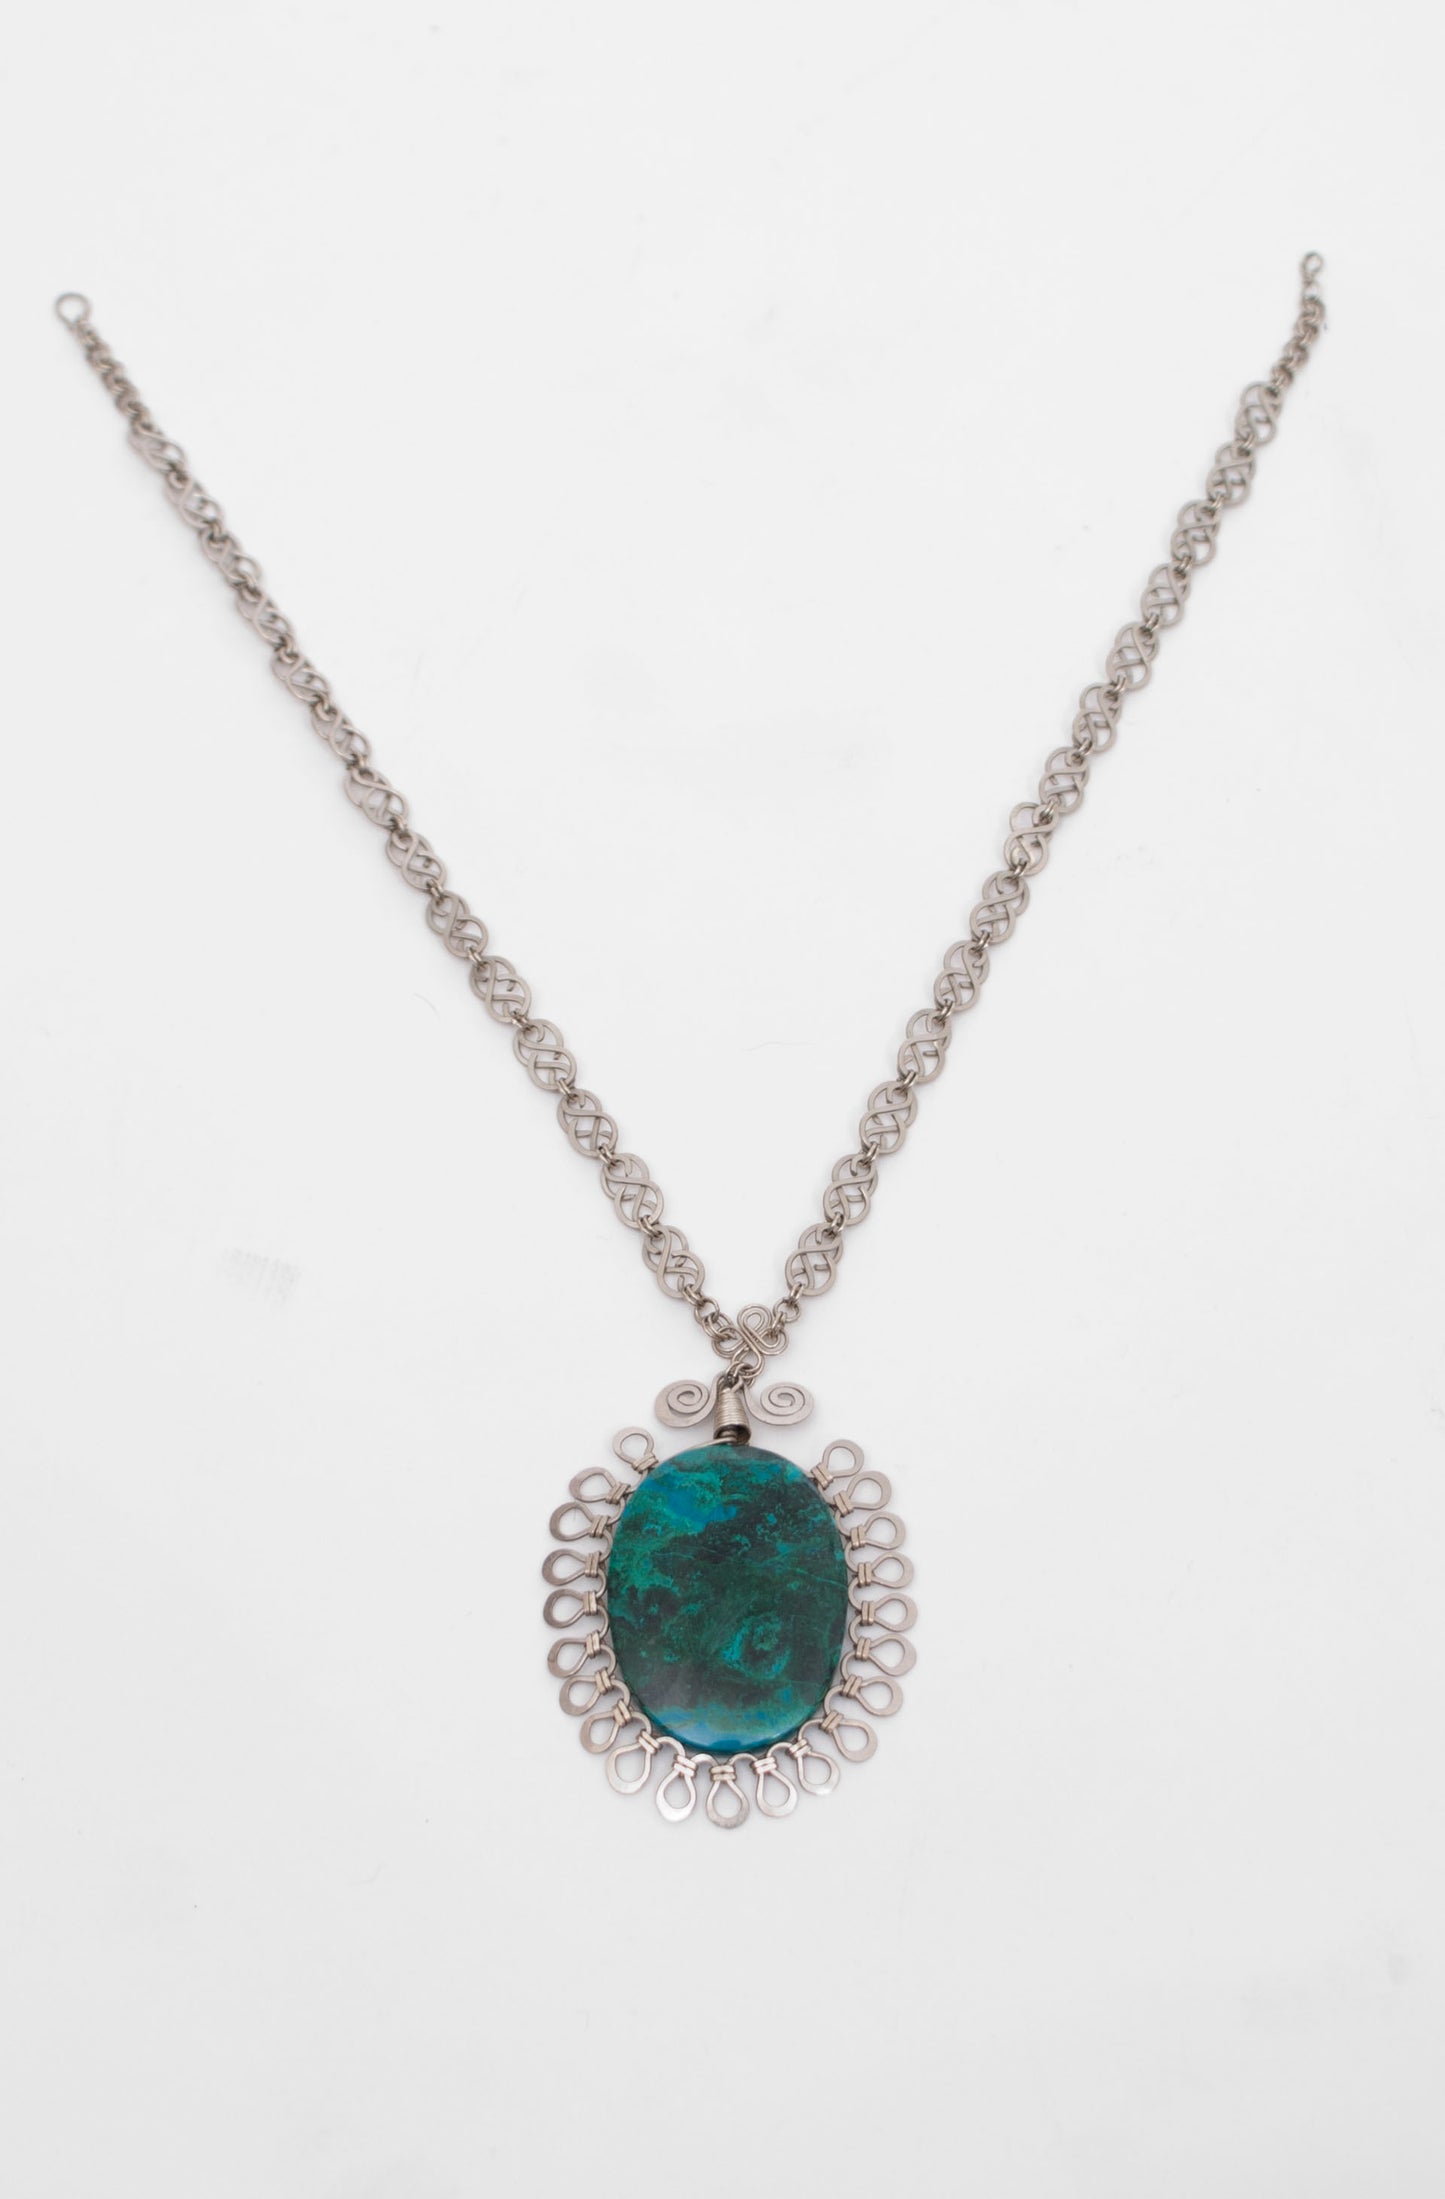 Alpacka and chrysocolla necklace